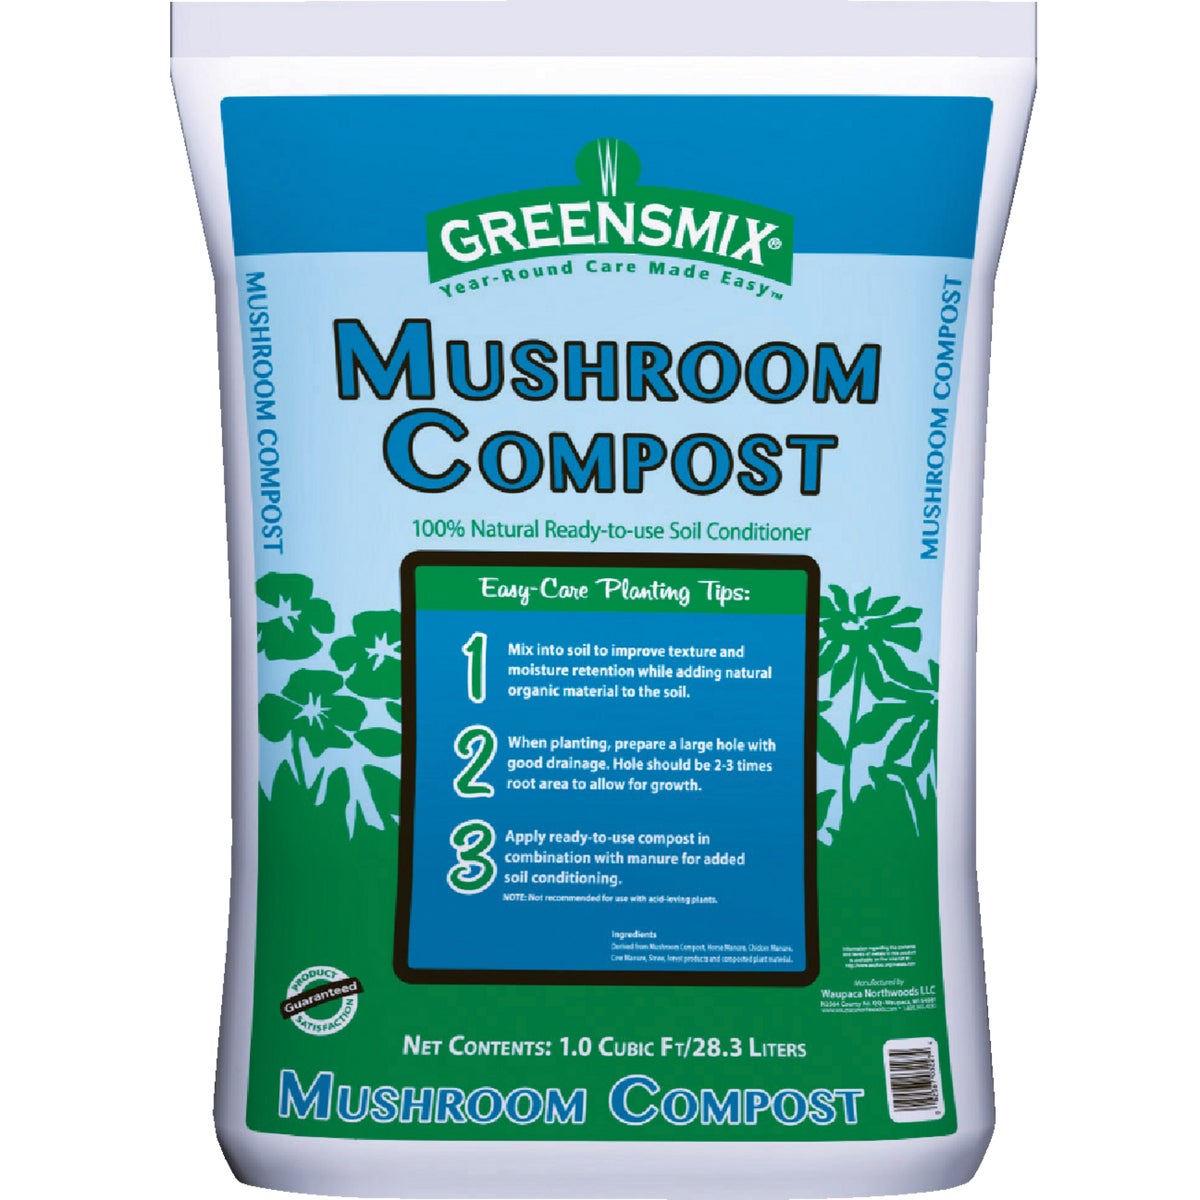 Item 702990, 100% natural ready-to-use soil conditioner; for easy year-round care.